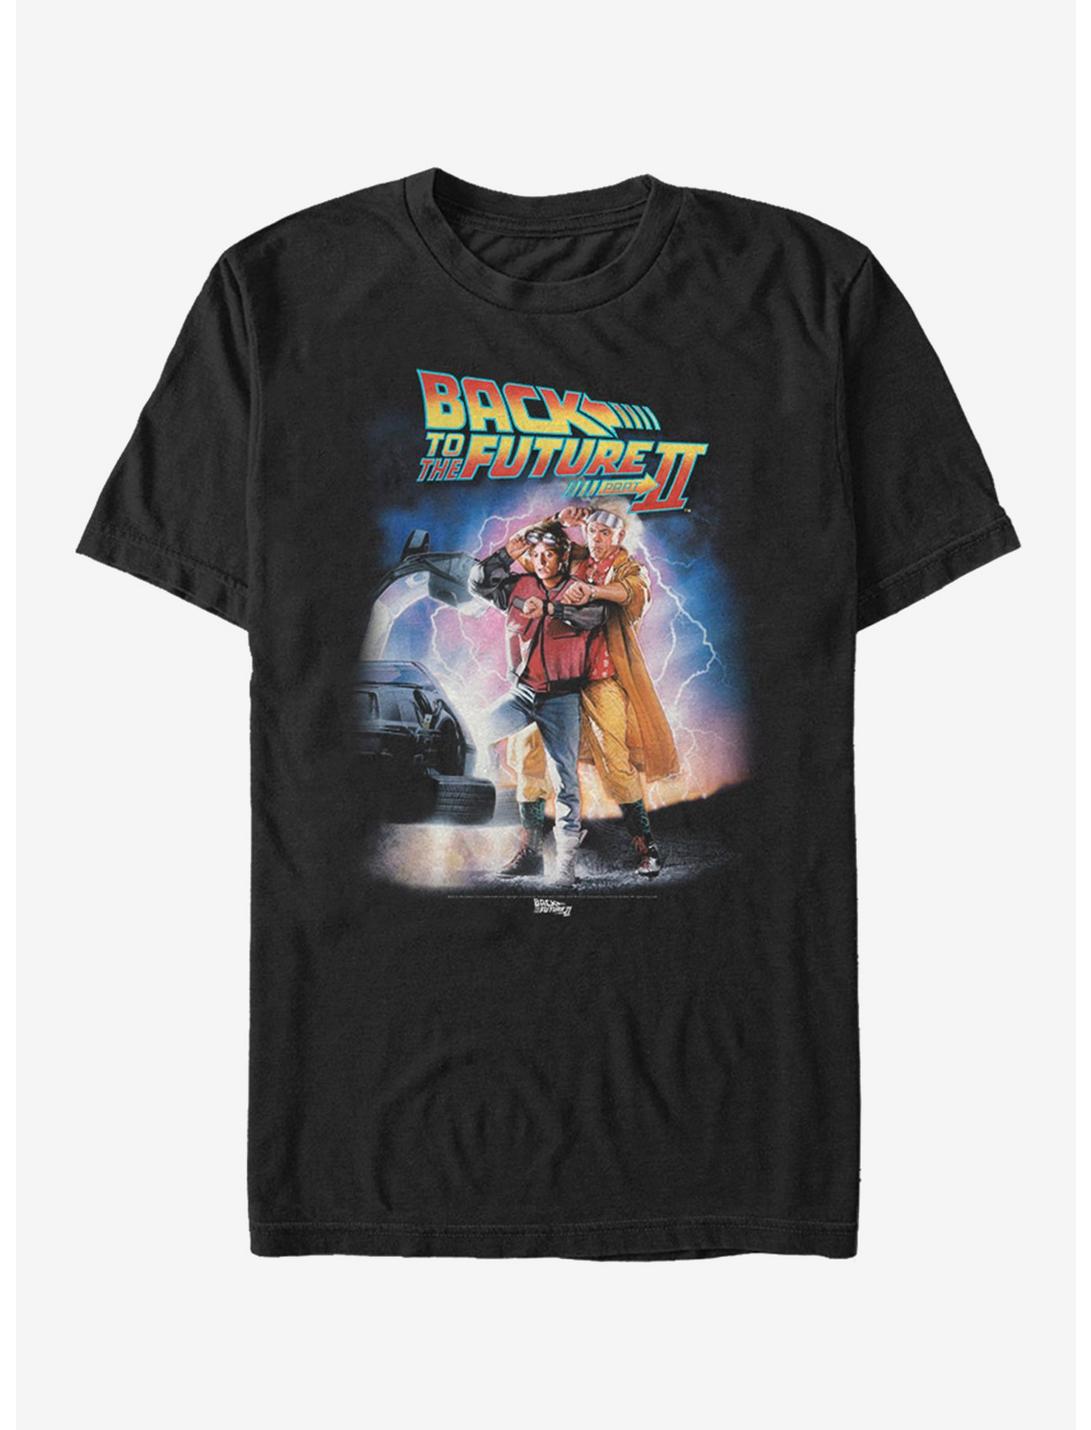 Back to the Future II Poster T-Shirt, BLACK, hi-res